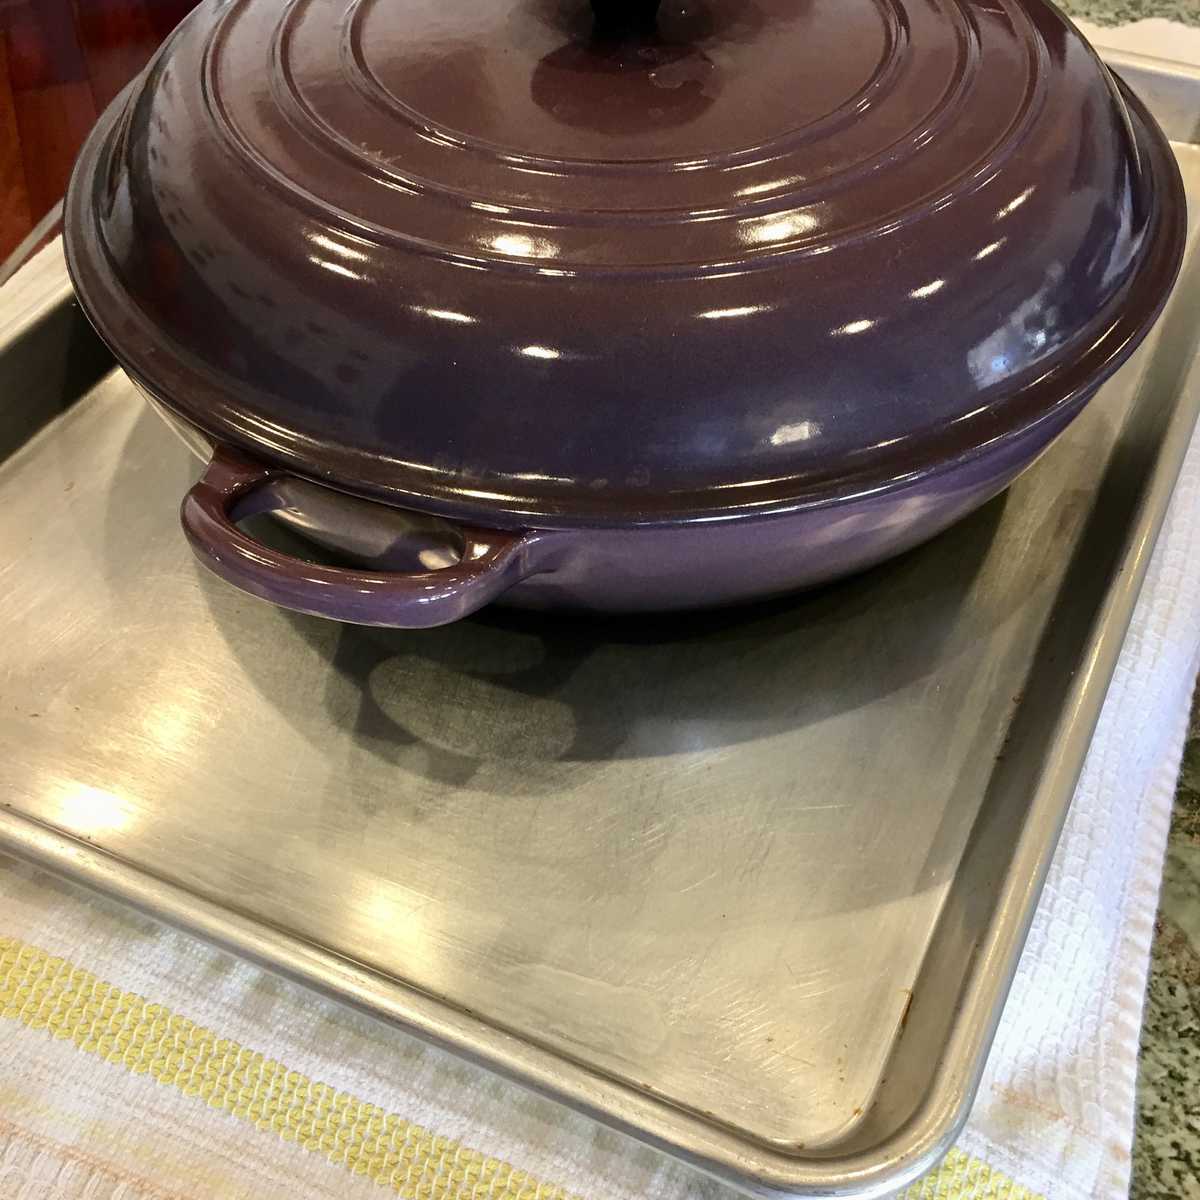 weighing down the eggplant to draw moisture out of it using a heavy pan. 